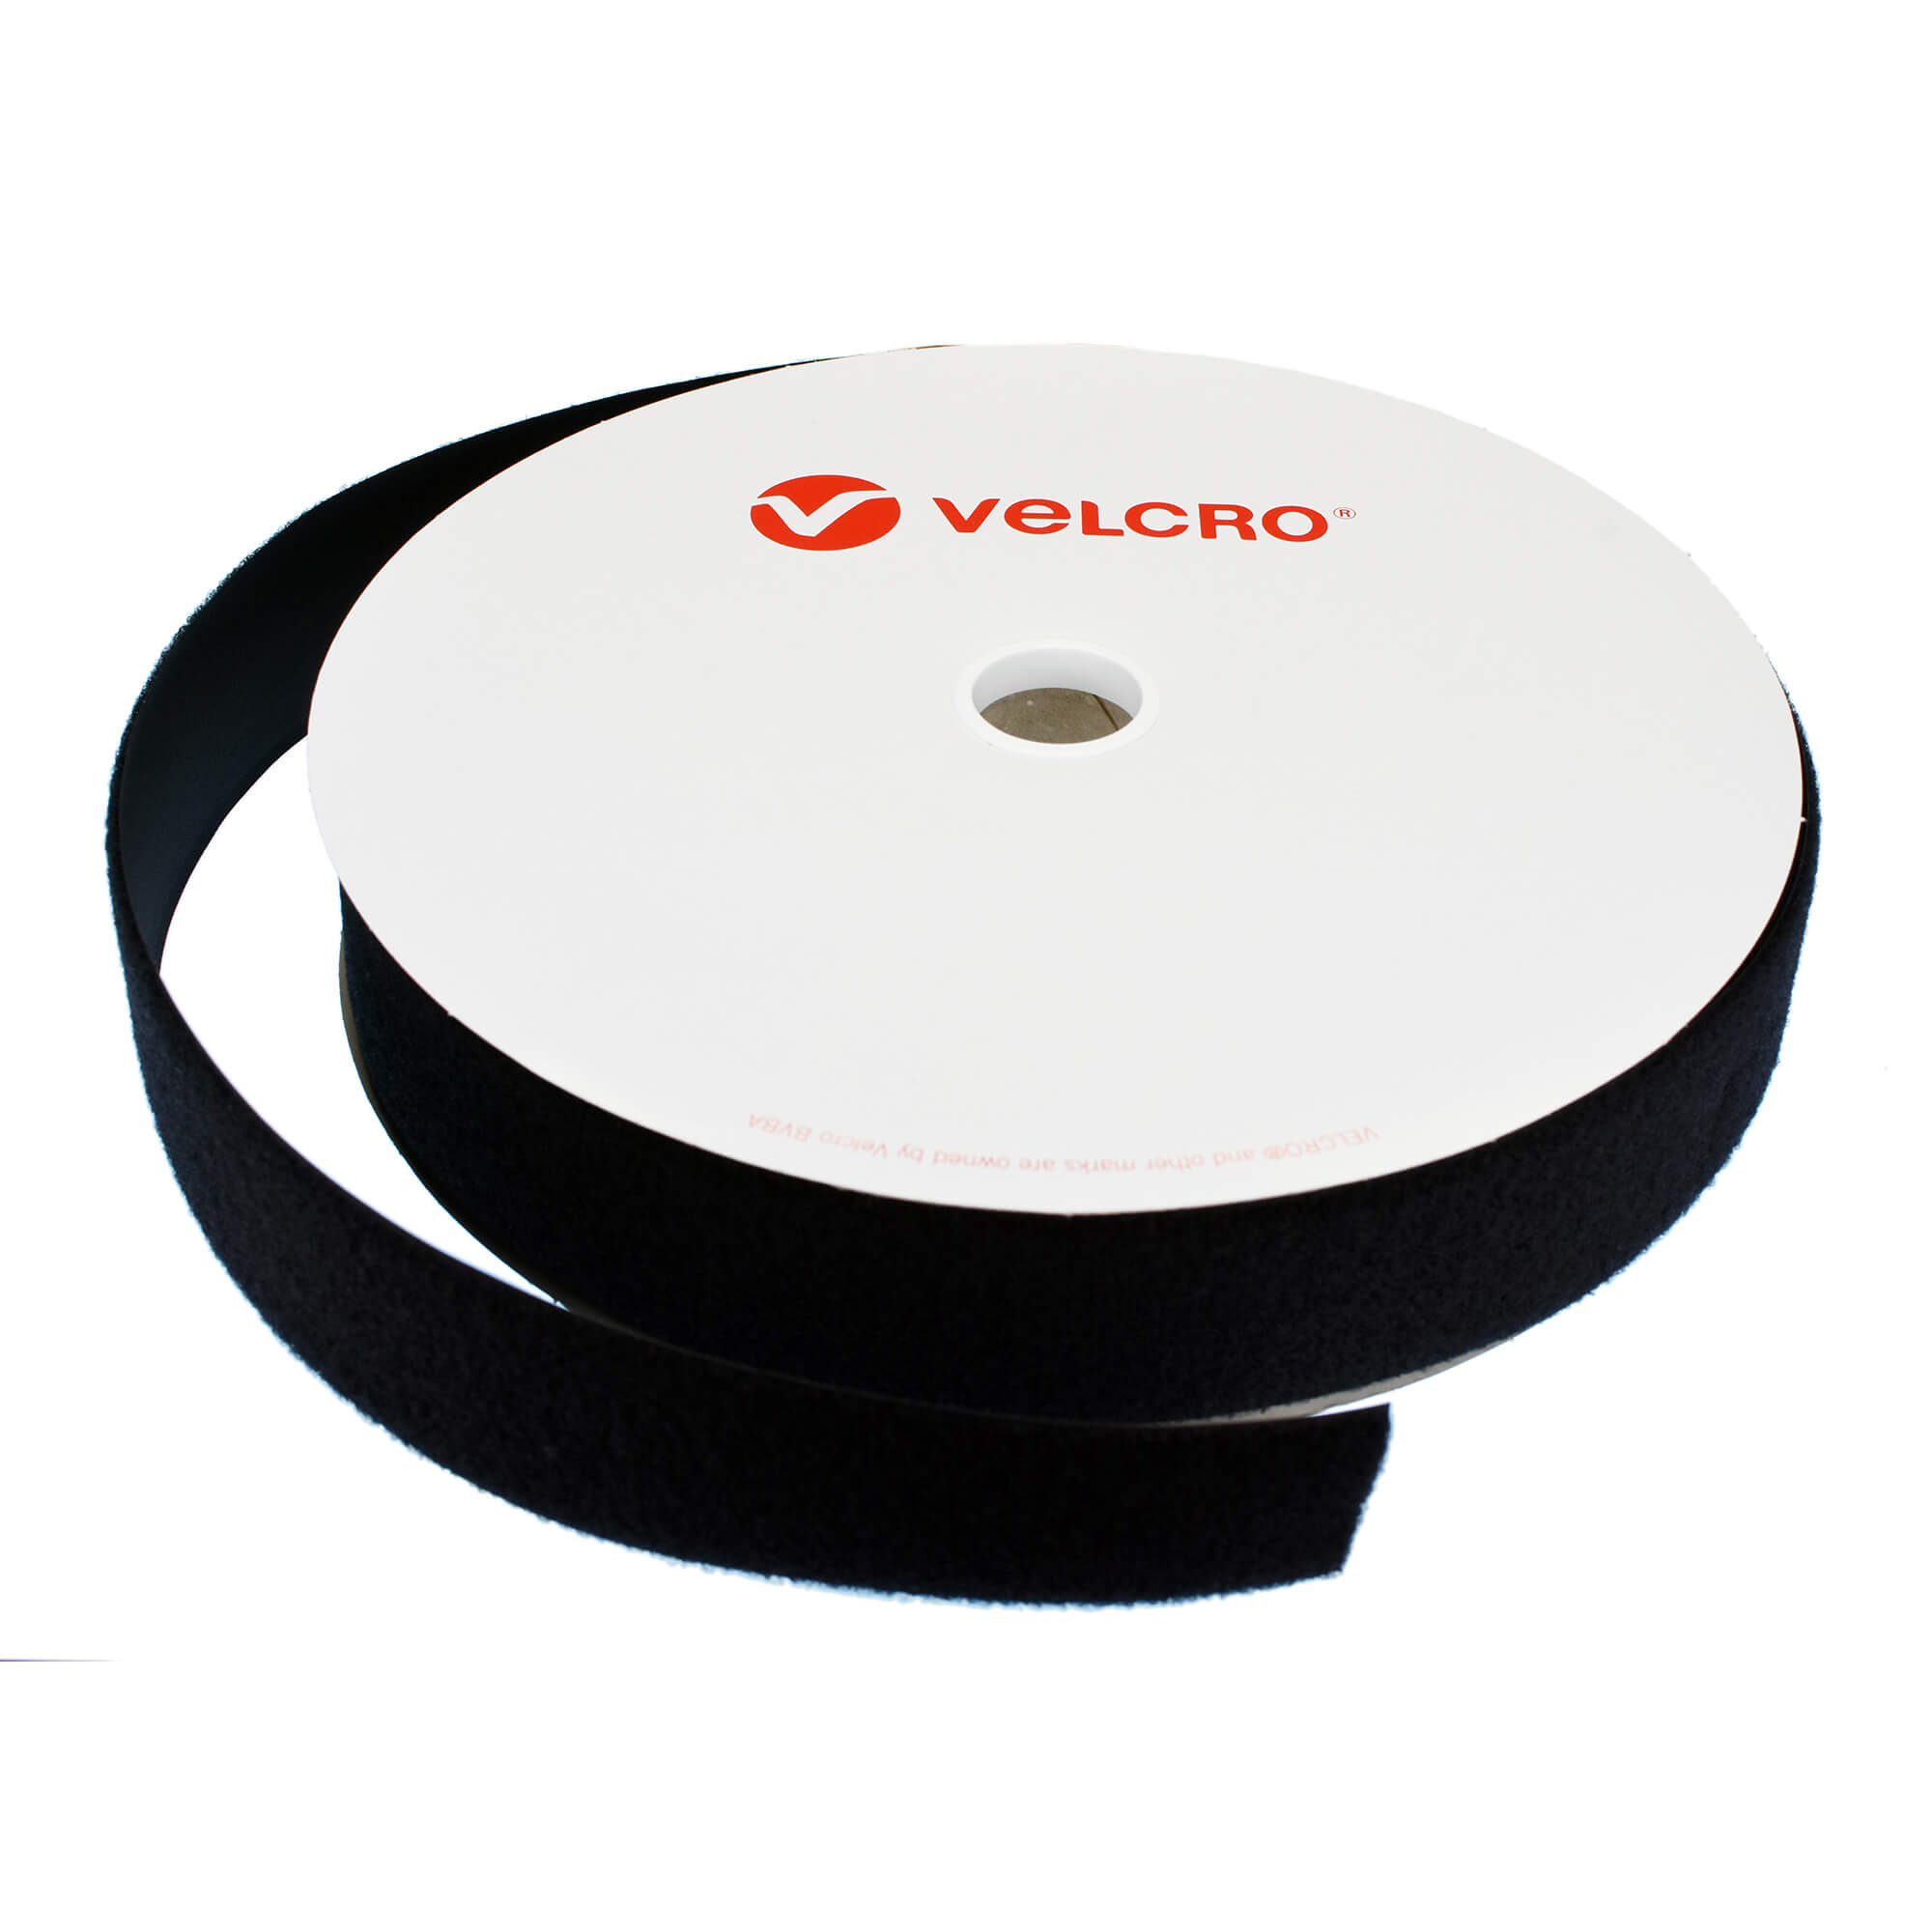 Cose - Velcro for sewing M / F (1mt x 20mm) black or white